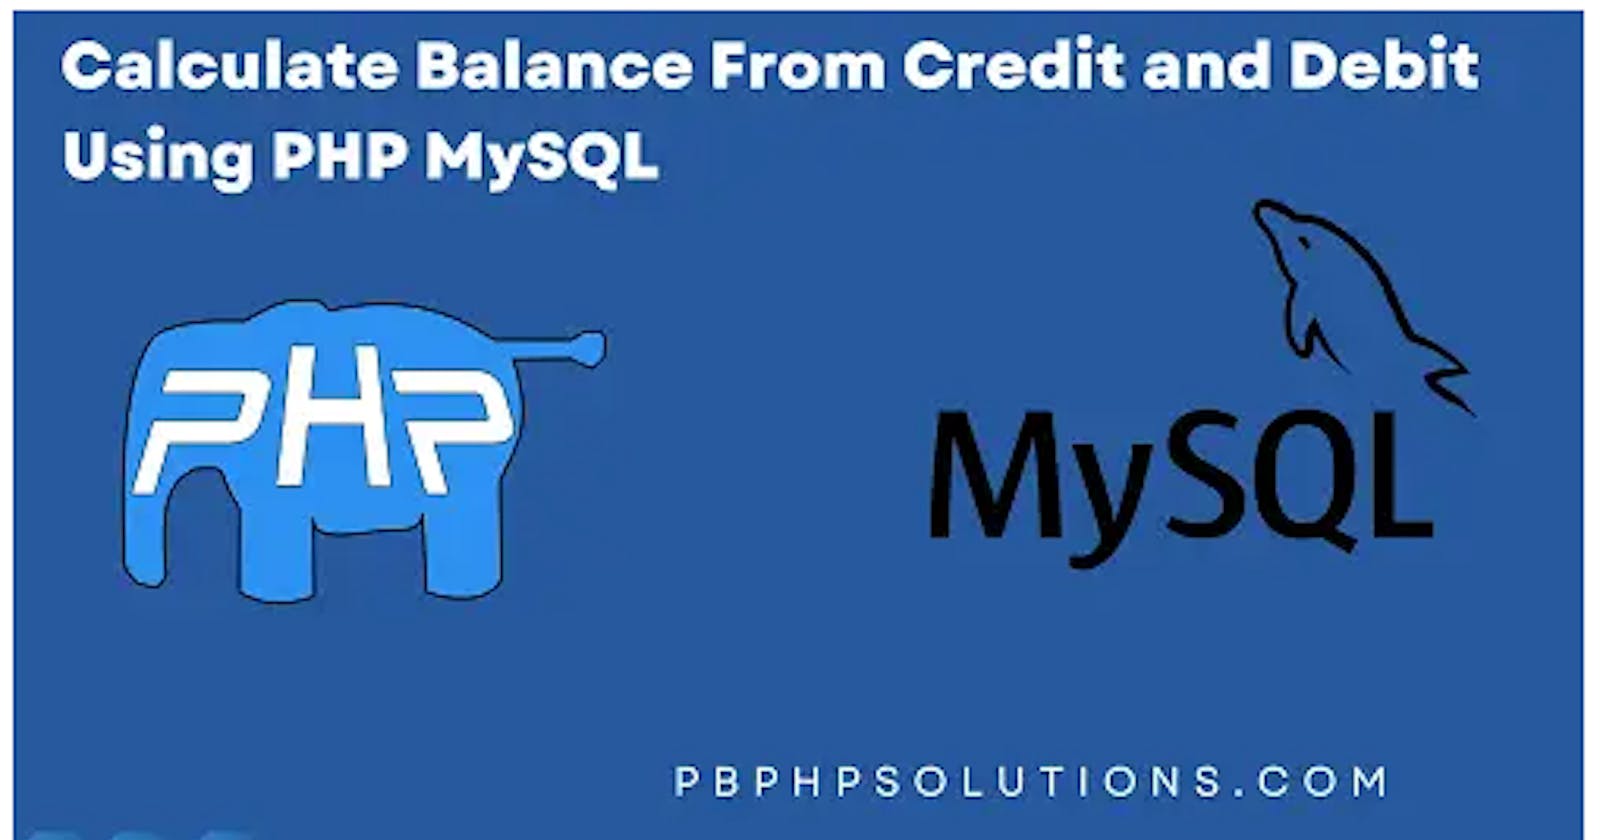 Calculate Balance From Credit and Debit Using PHP MySQL